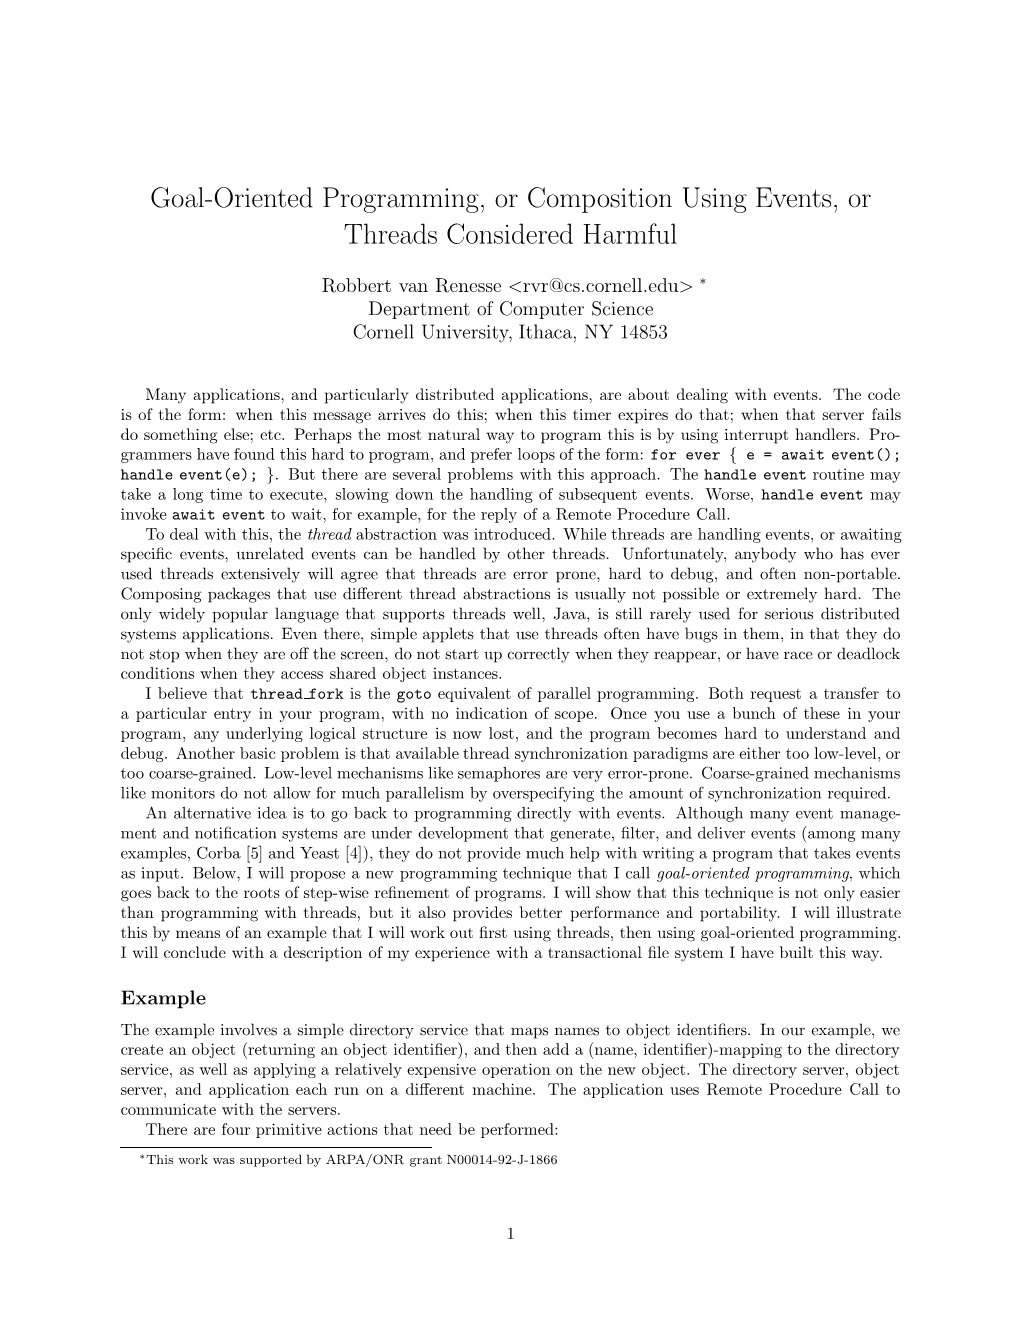 Goal-Oriented Programming, Or Composition Using Events, Or Threads Considered Harmful